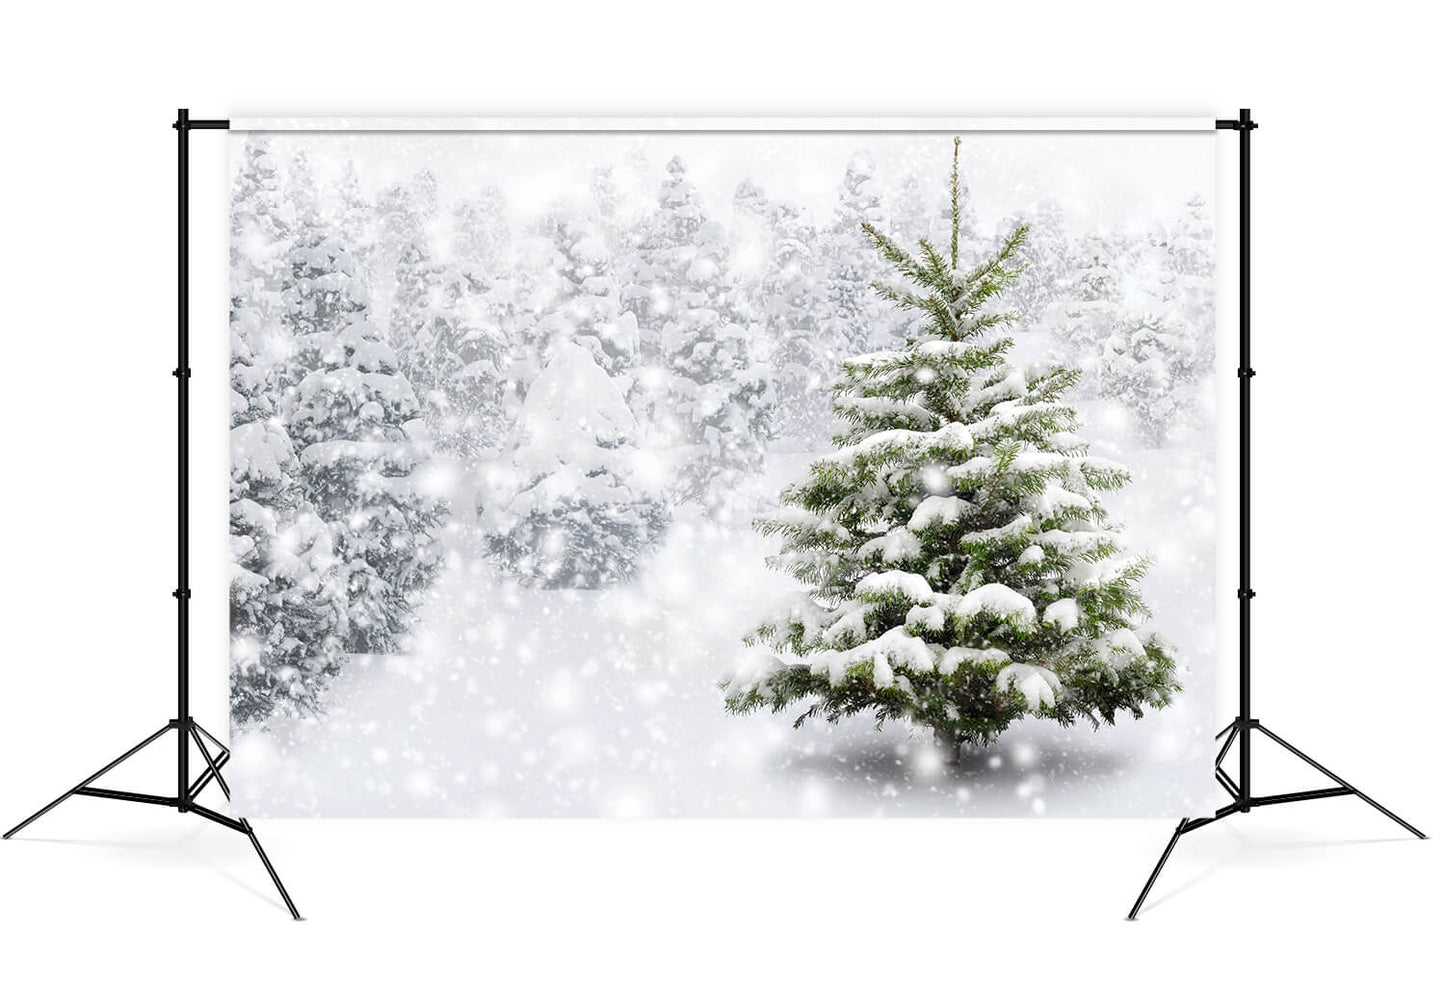 Winter Falling Snowflake Pine Forest Backdrop M7-26